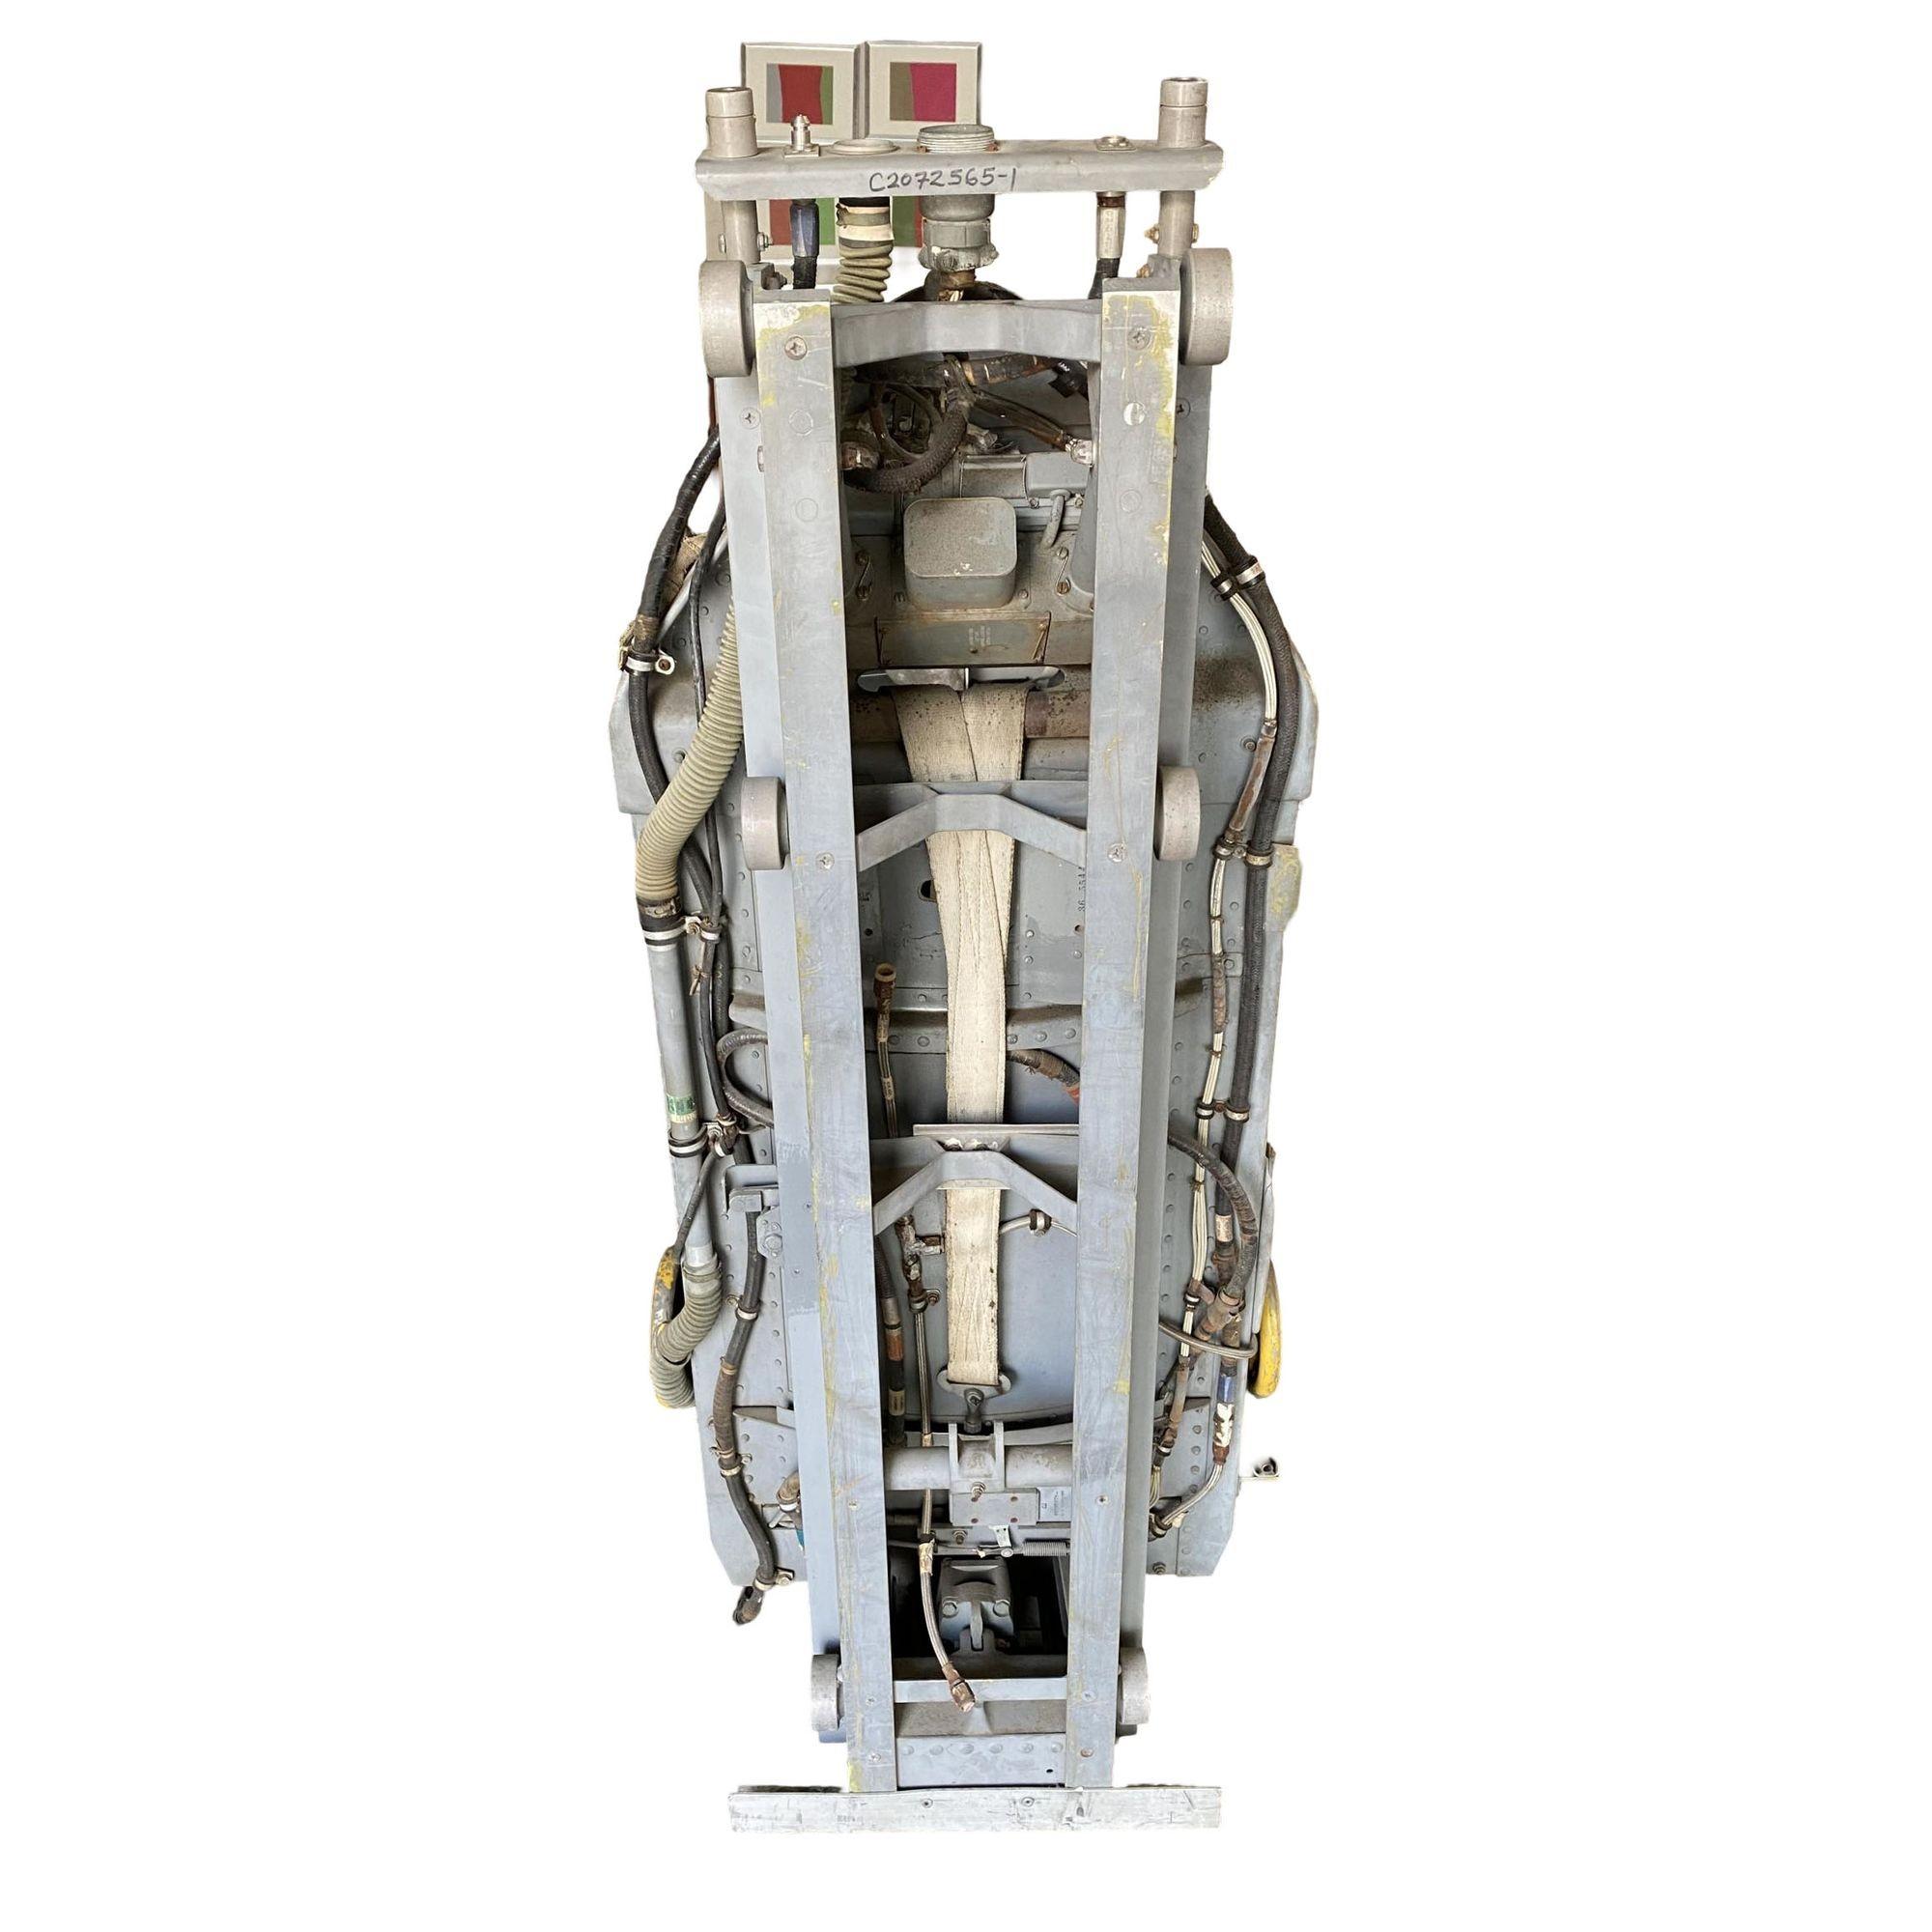 American Boeing B-52 Bombardier's Ejection Seat For Lower Deck For Sale